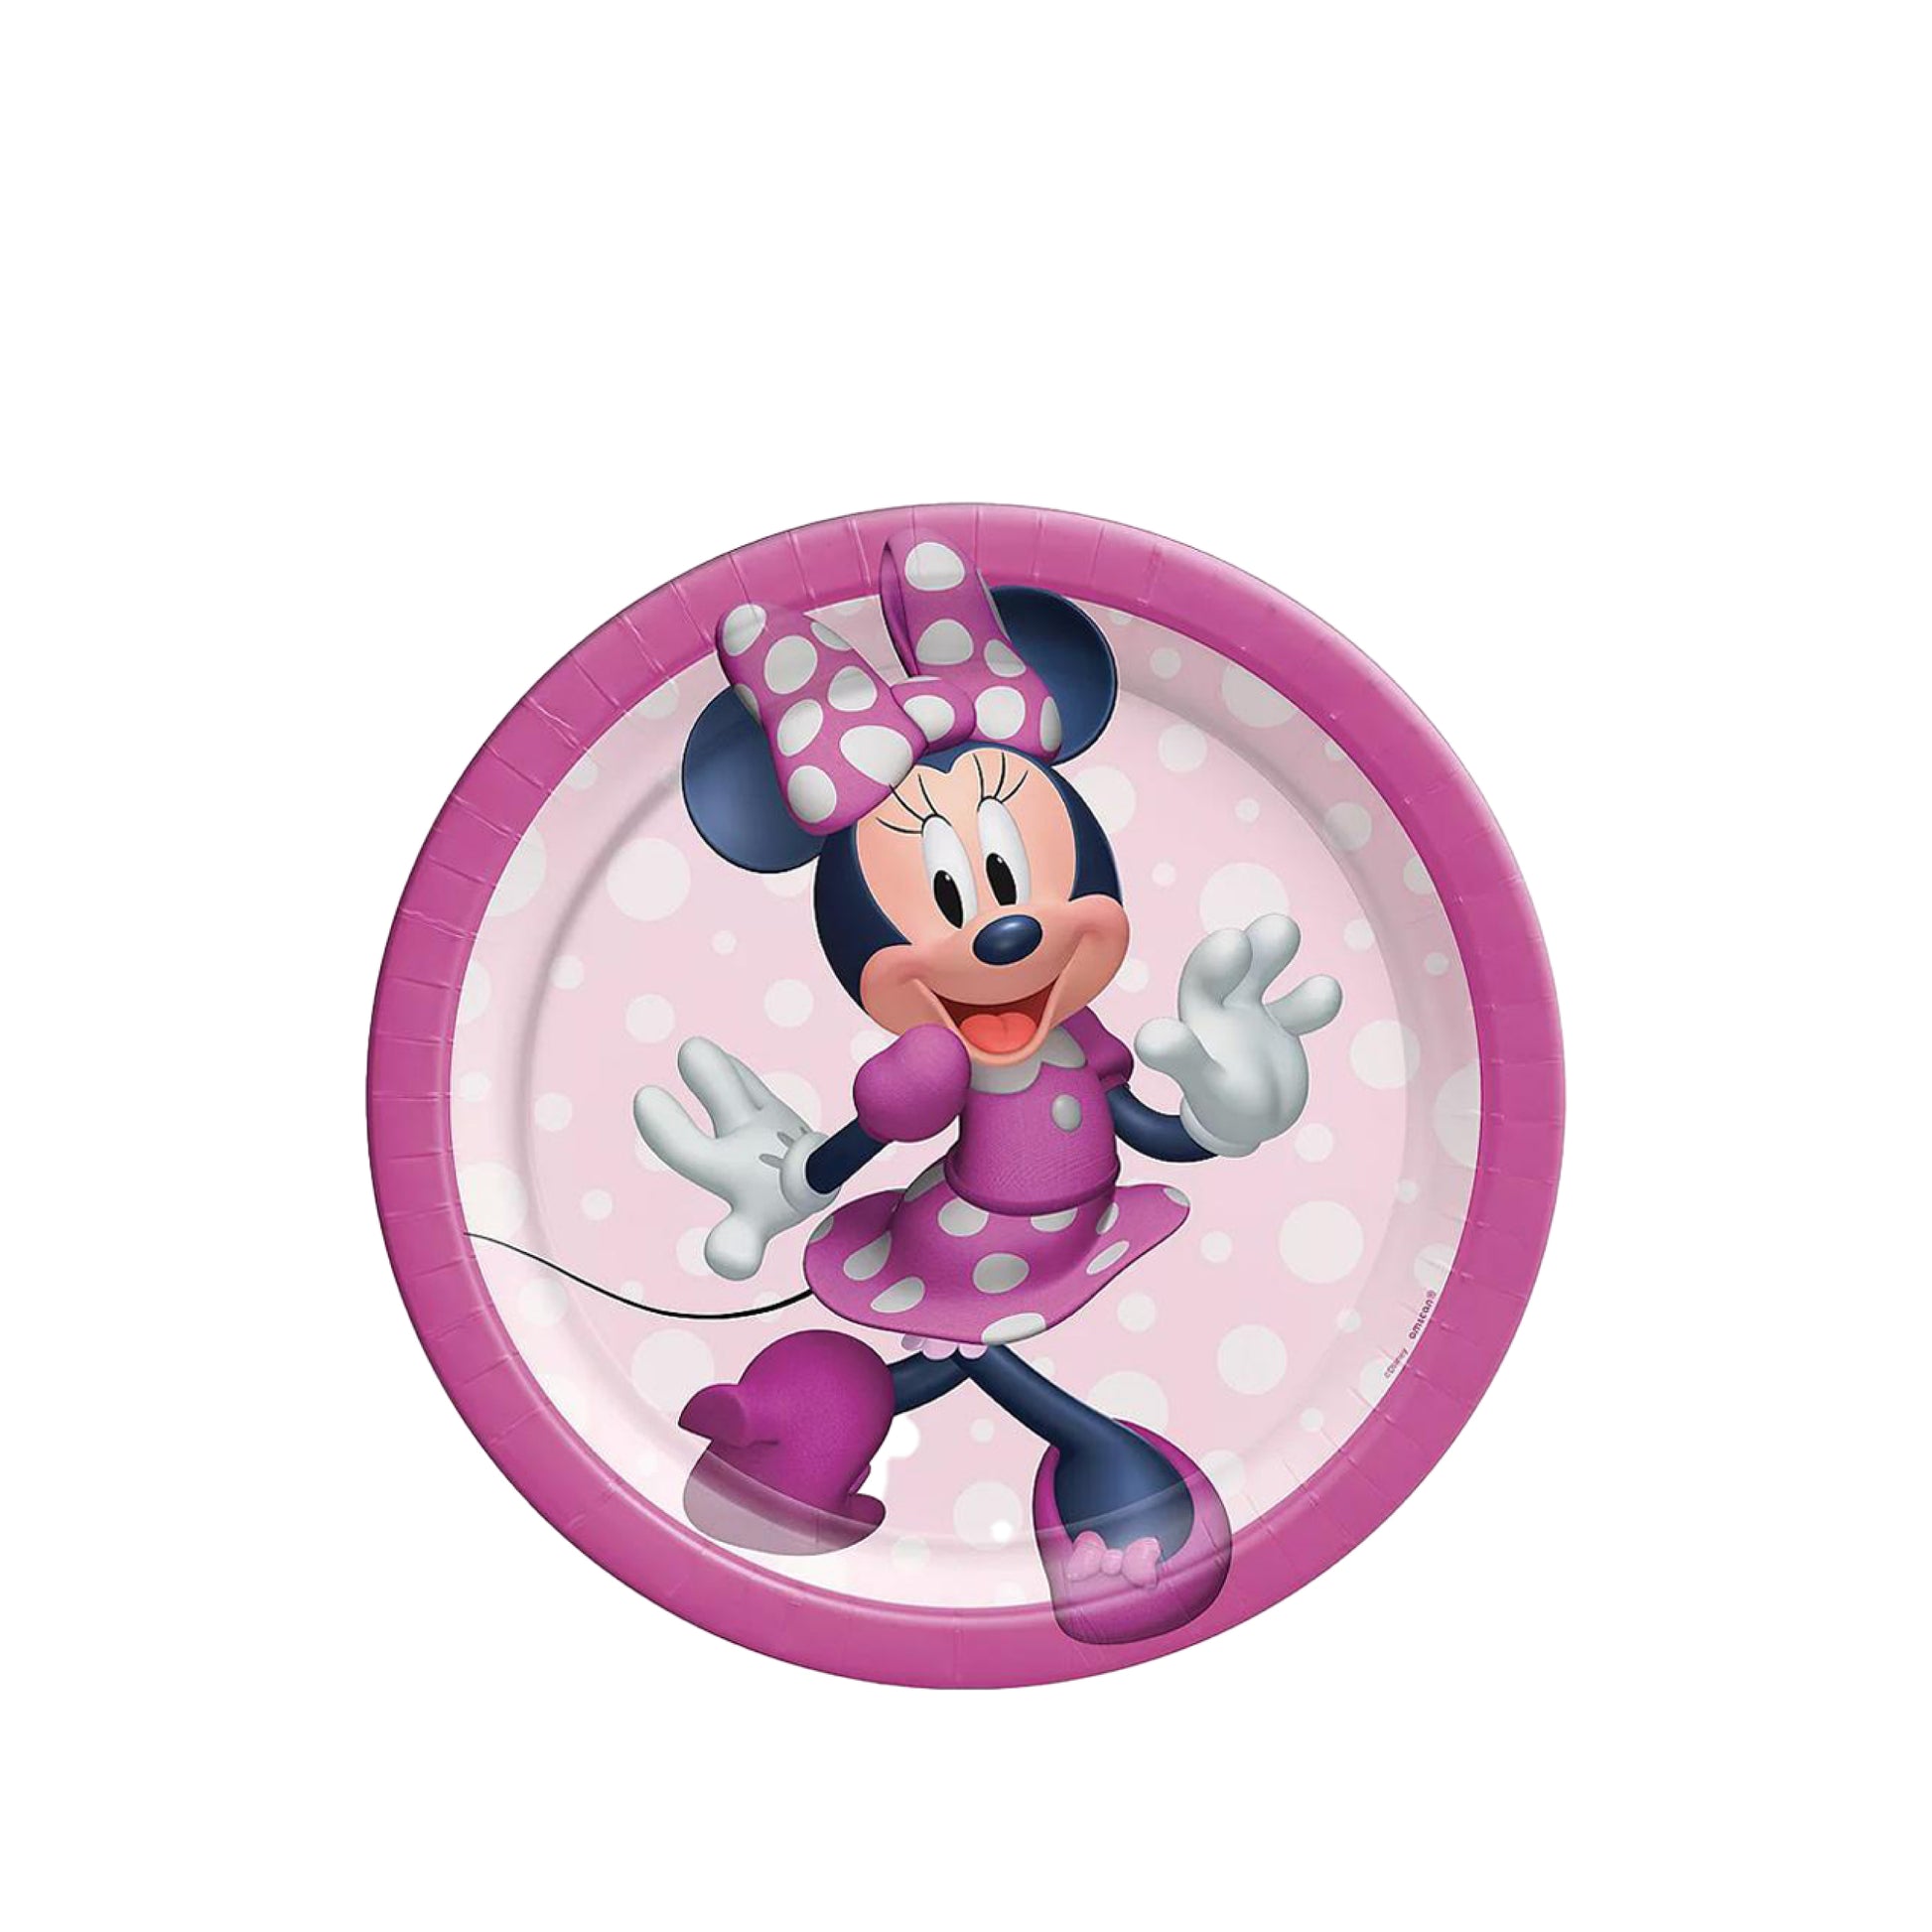  Minnie Mouse Round Paper Plates